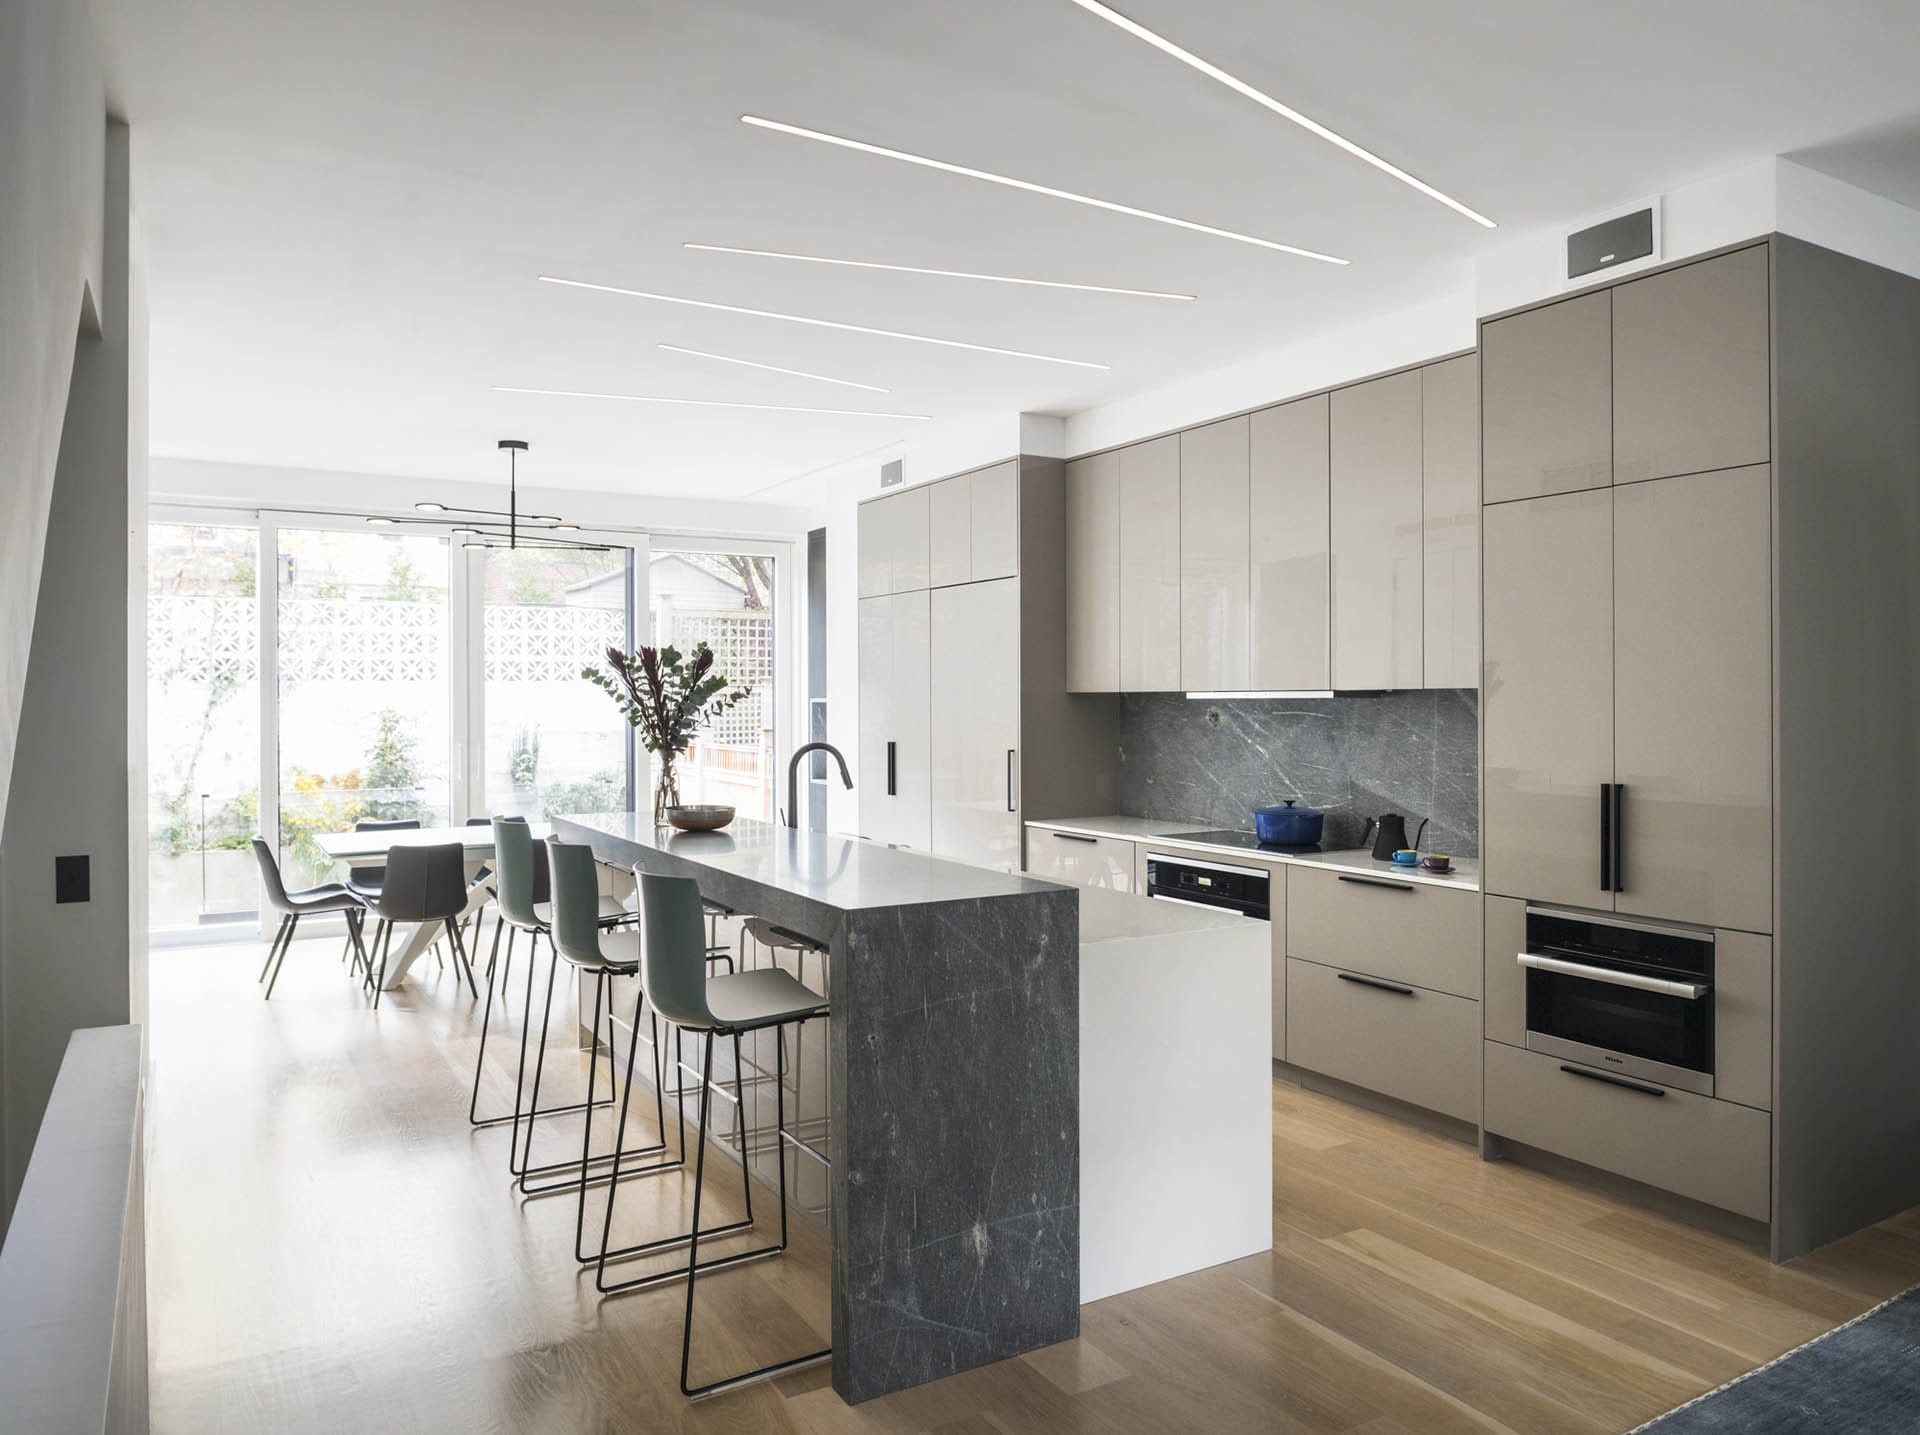 Parlor-level kitchen with wood floors, stone island and modern, tan cabinetry in a Brooklyn Heights Passive House